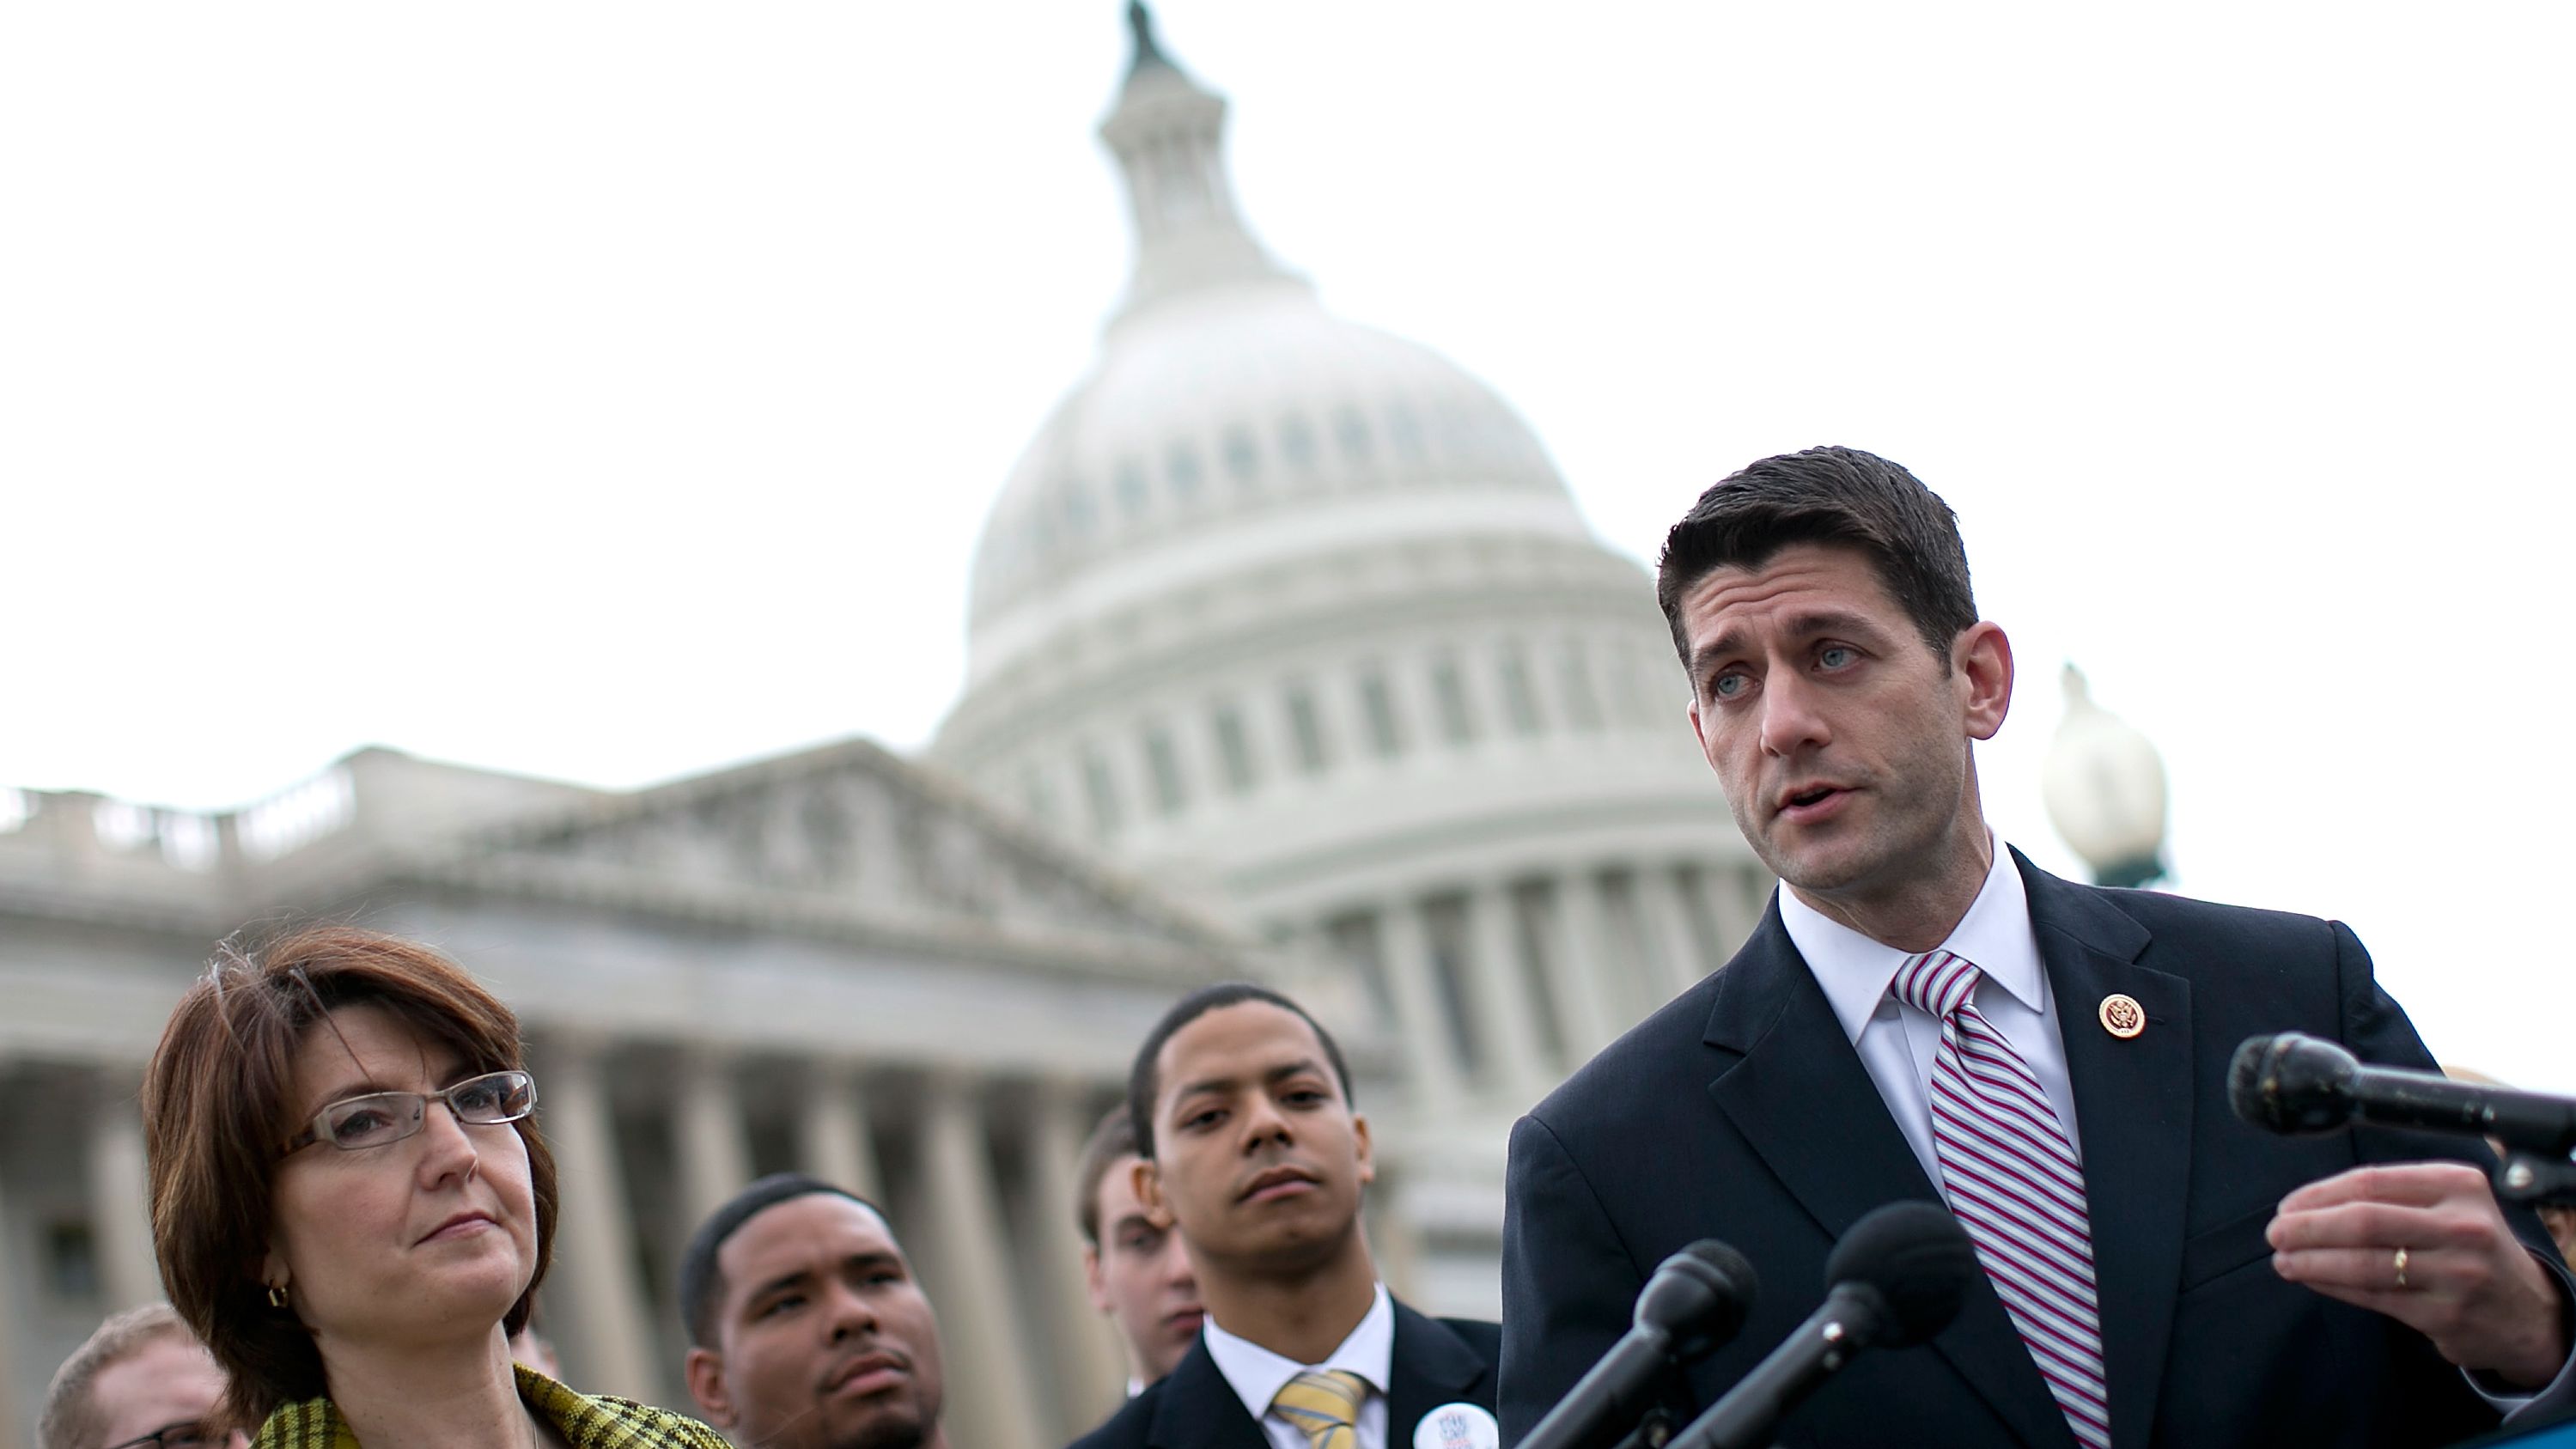 Rep. Paul Ryan steps into budget crisis with opinion piece that irritated conservatives